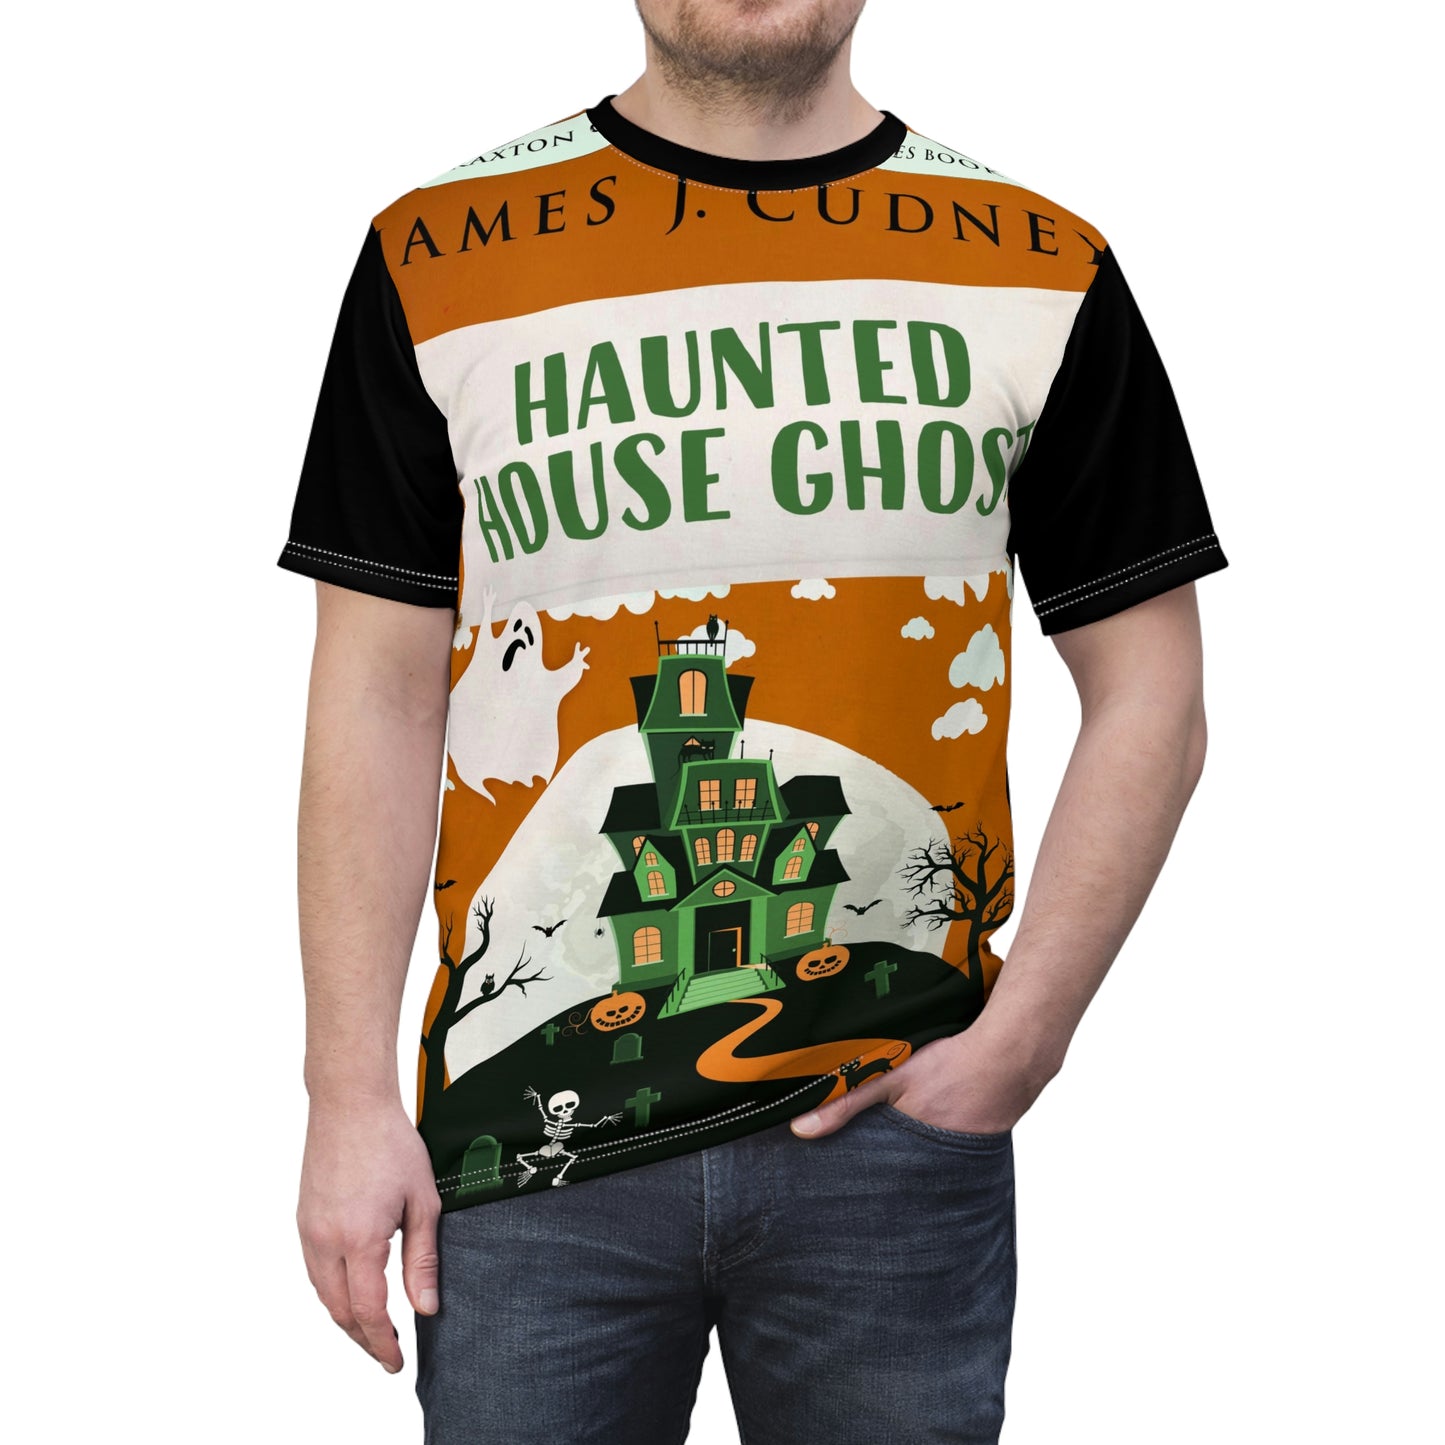 Haunted House Ghost - Unisex All-Over Print Cut & Sew T-Shirt